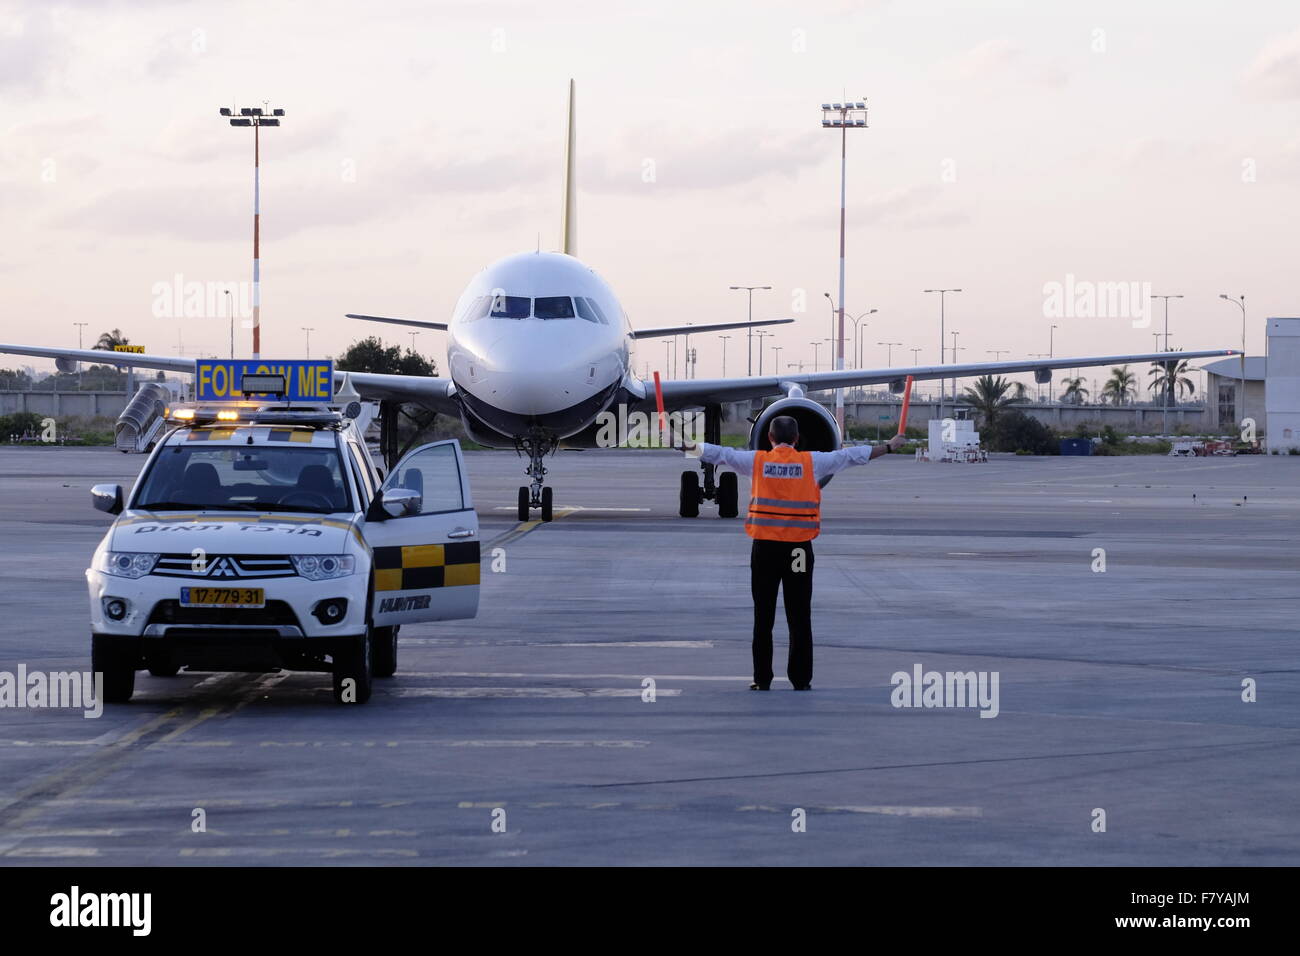 An Airbus A320-200 airplane of Monarch Airlines is directed into position by ground staff after landing in Ben Gurion airport Israel Stock Photo